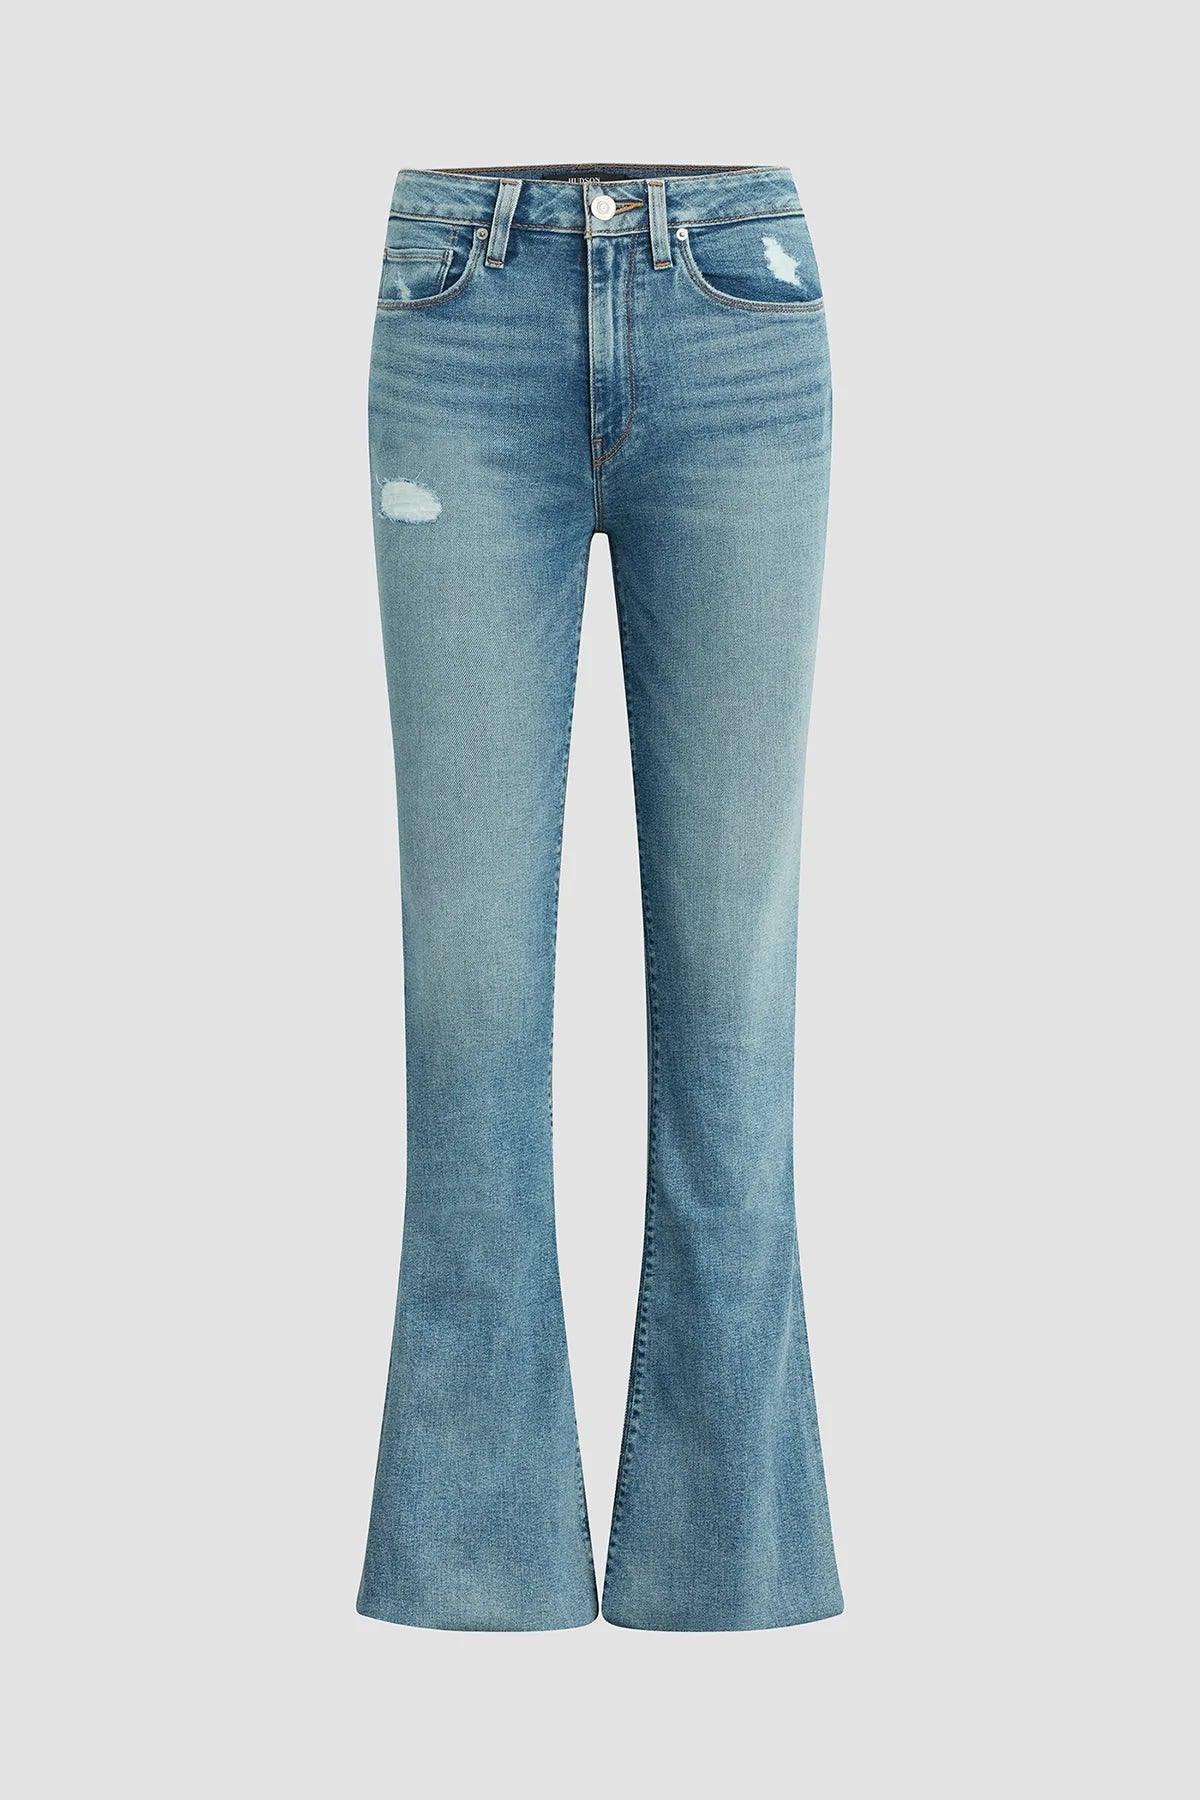 Holly High Rise Flare Jeans by Hudson (Various Colors) - Haven